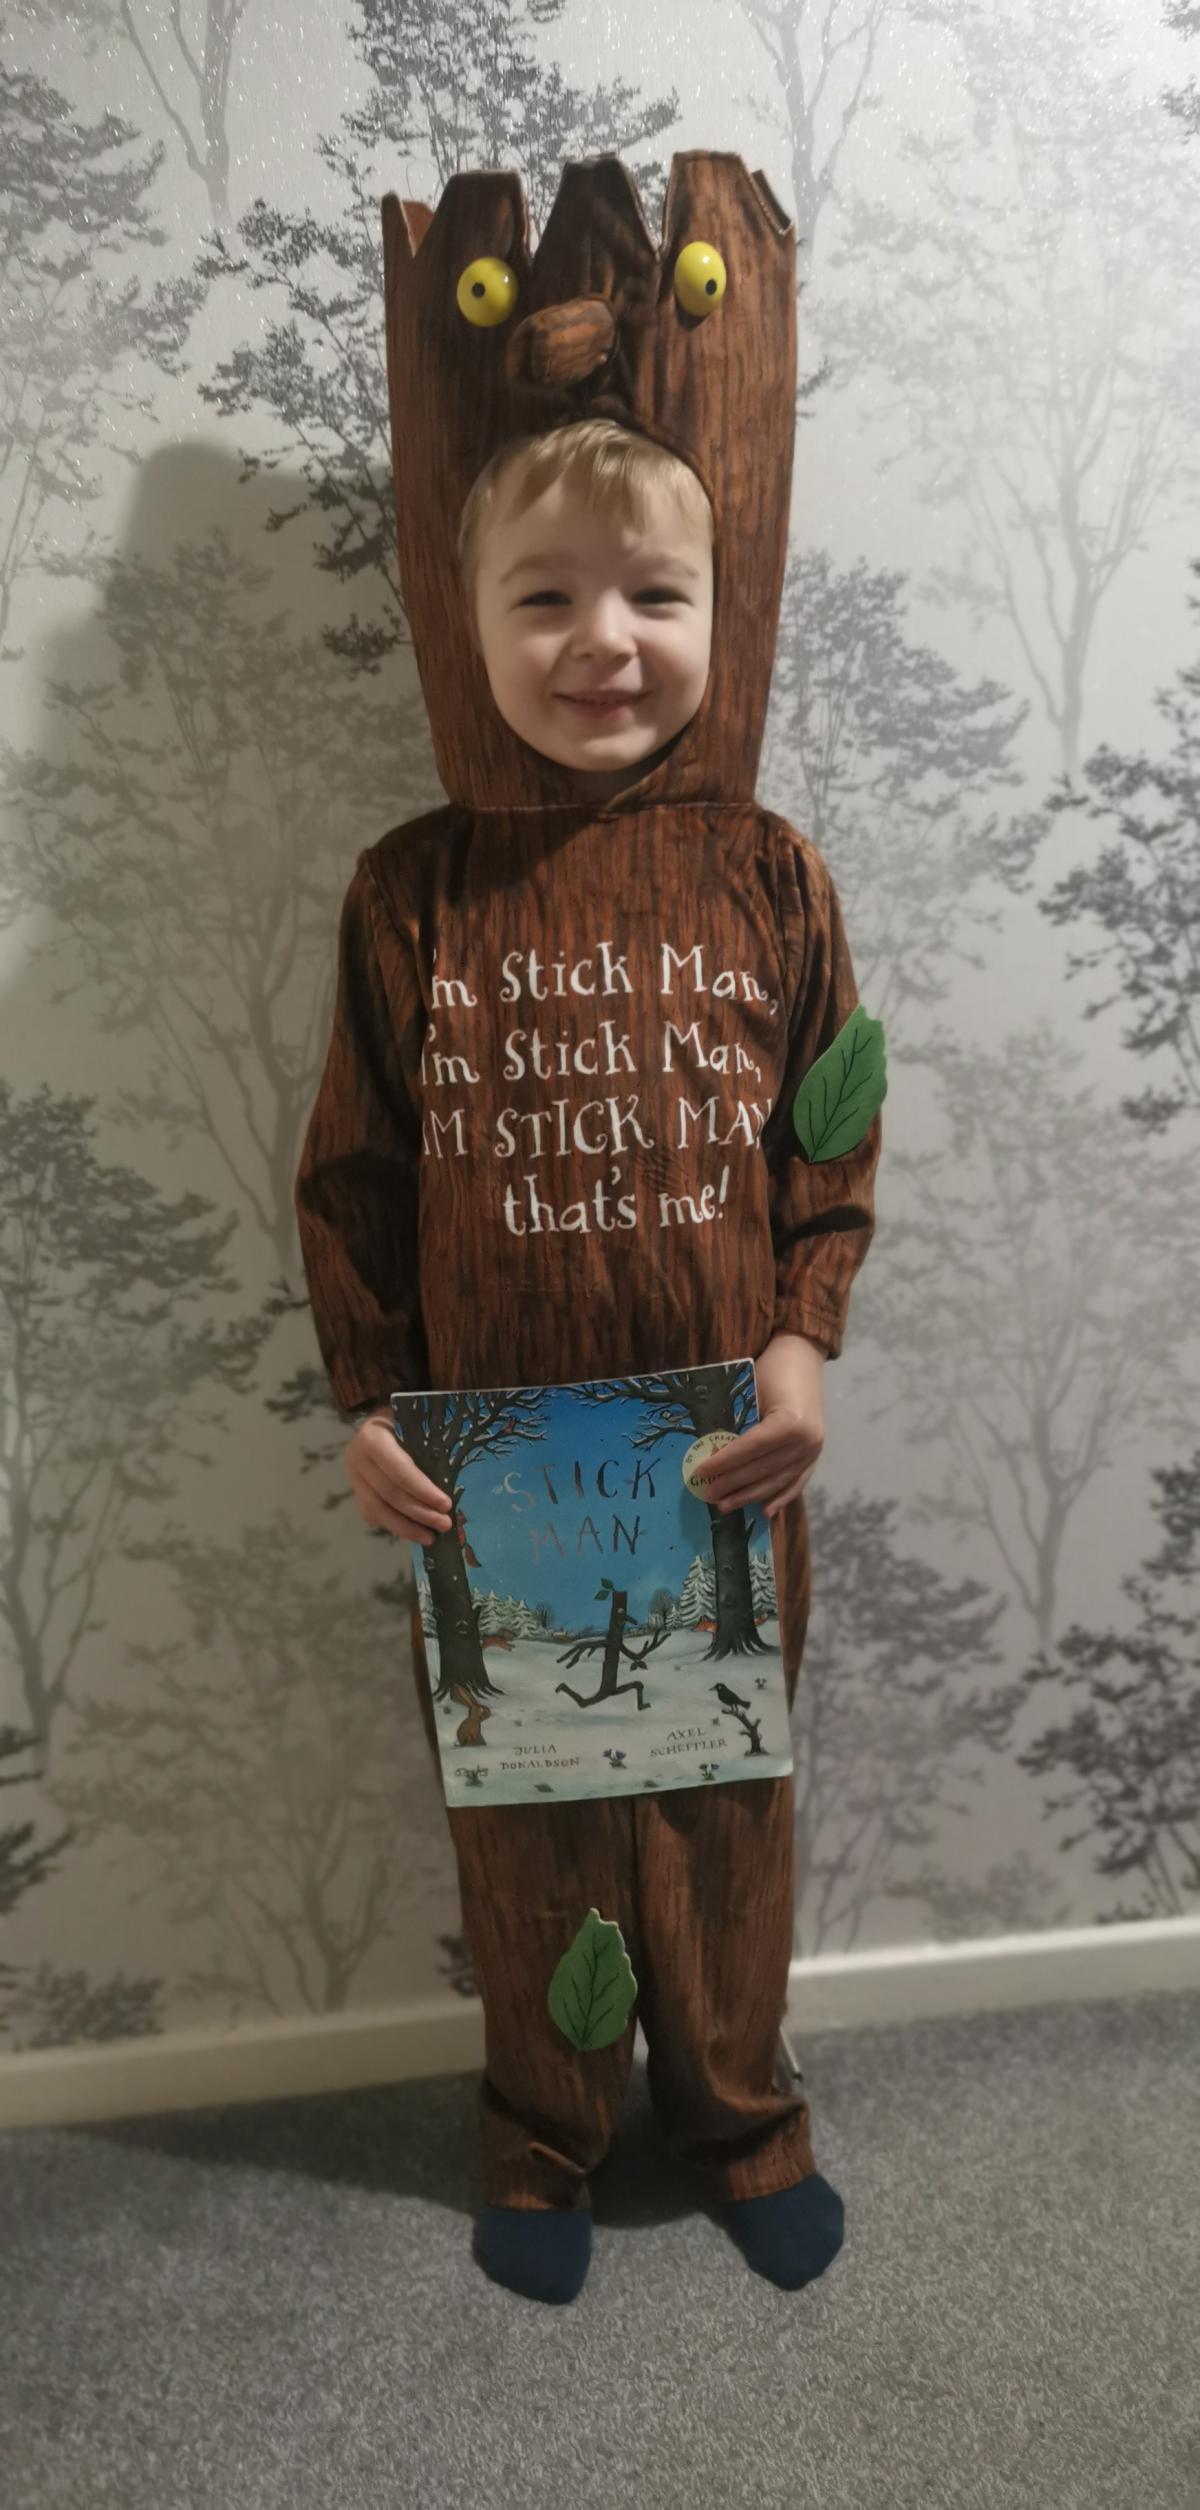 Is your youngster a Stick Man fan?